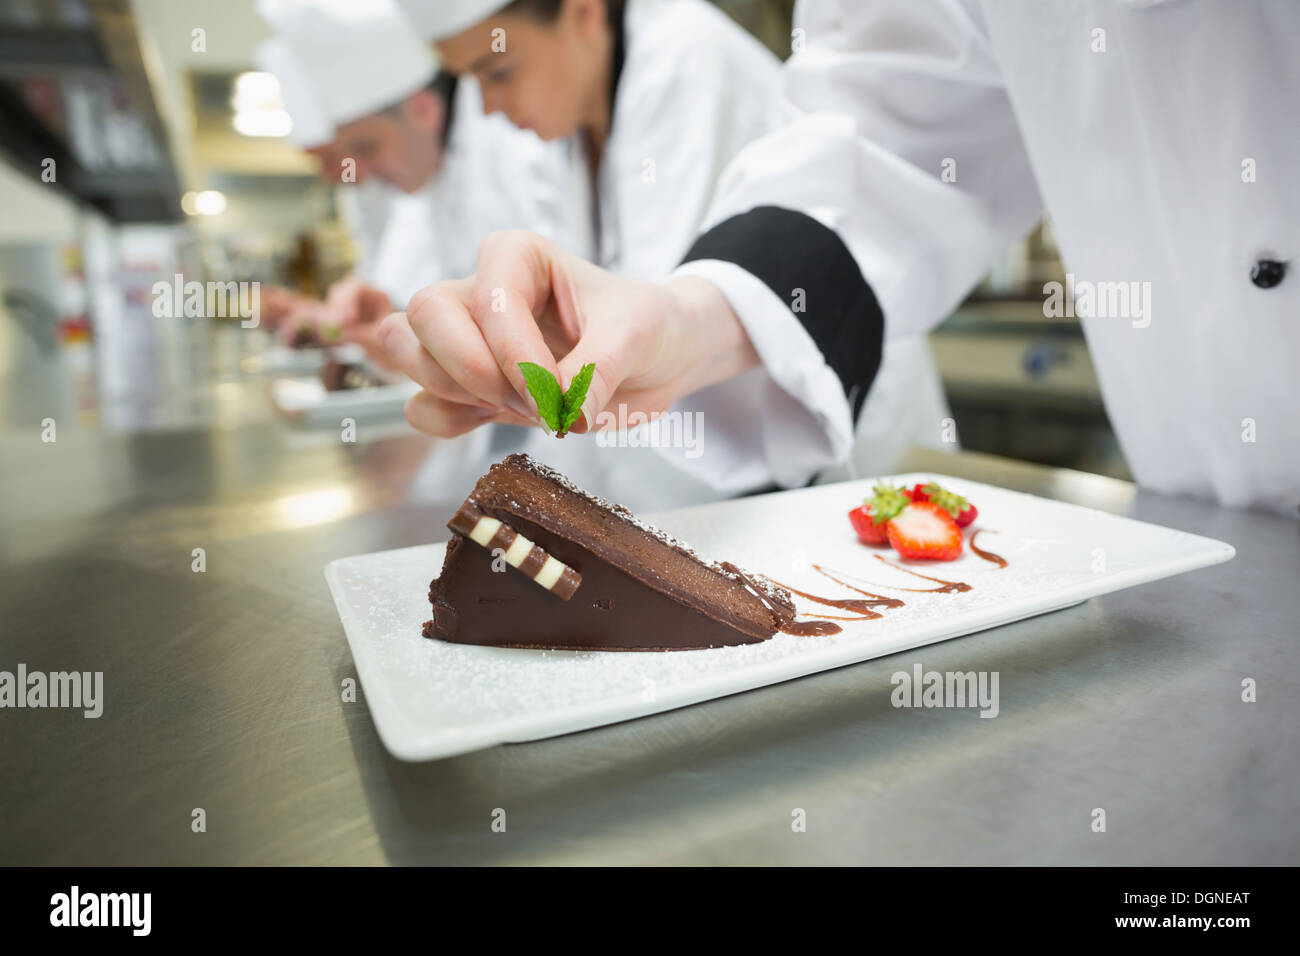 Chefs presenting chocolate cake Banque D'Images